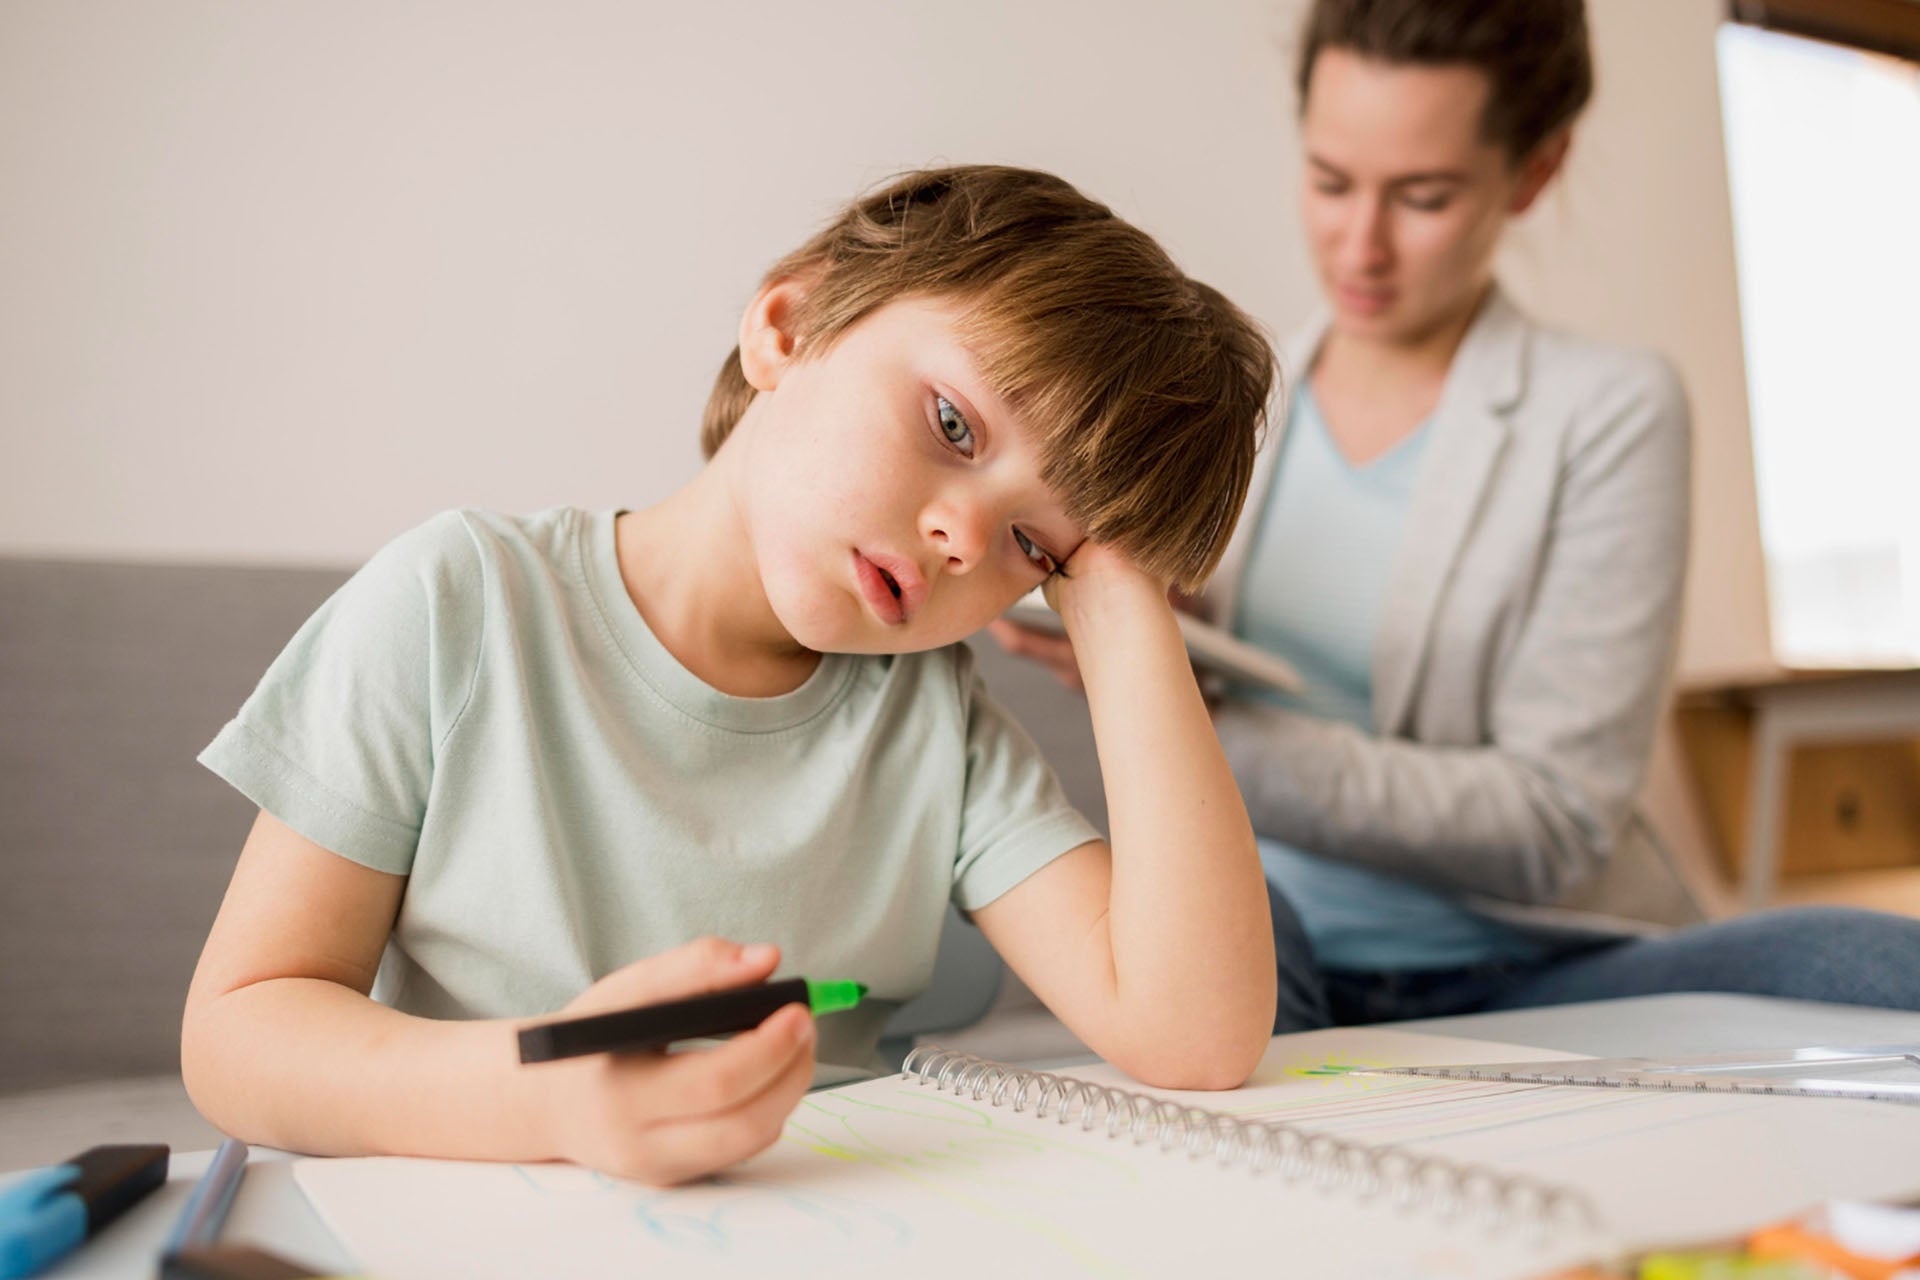 ADHD in Children: Symptoms, Causes, and Treatment